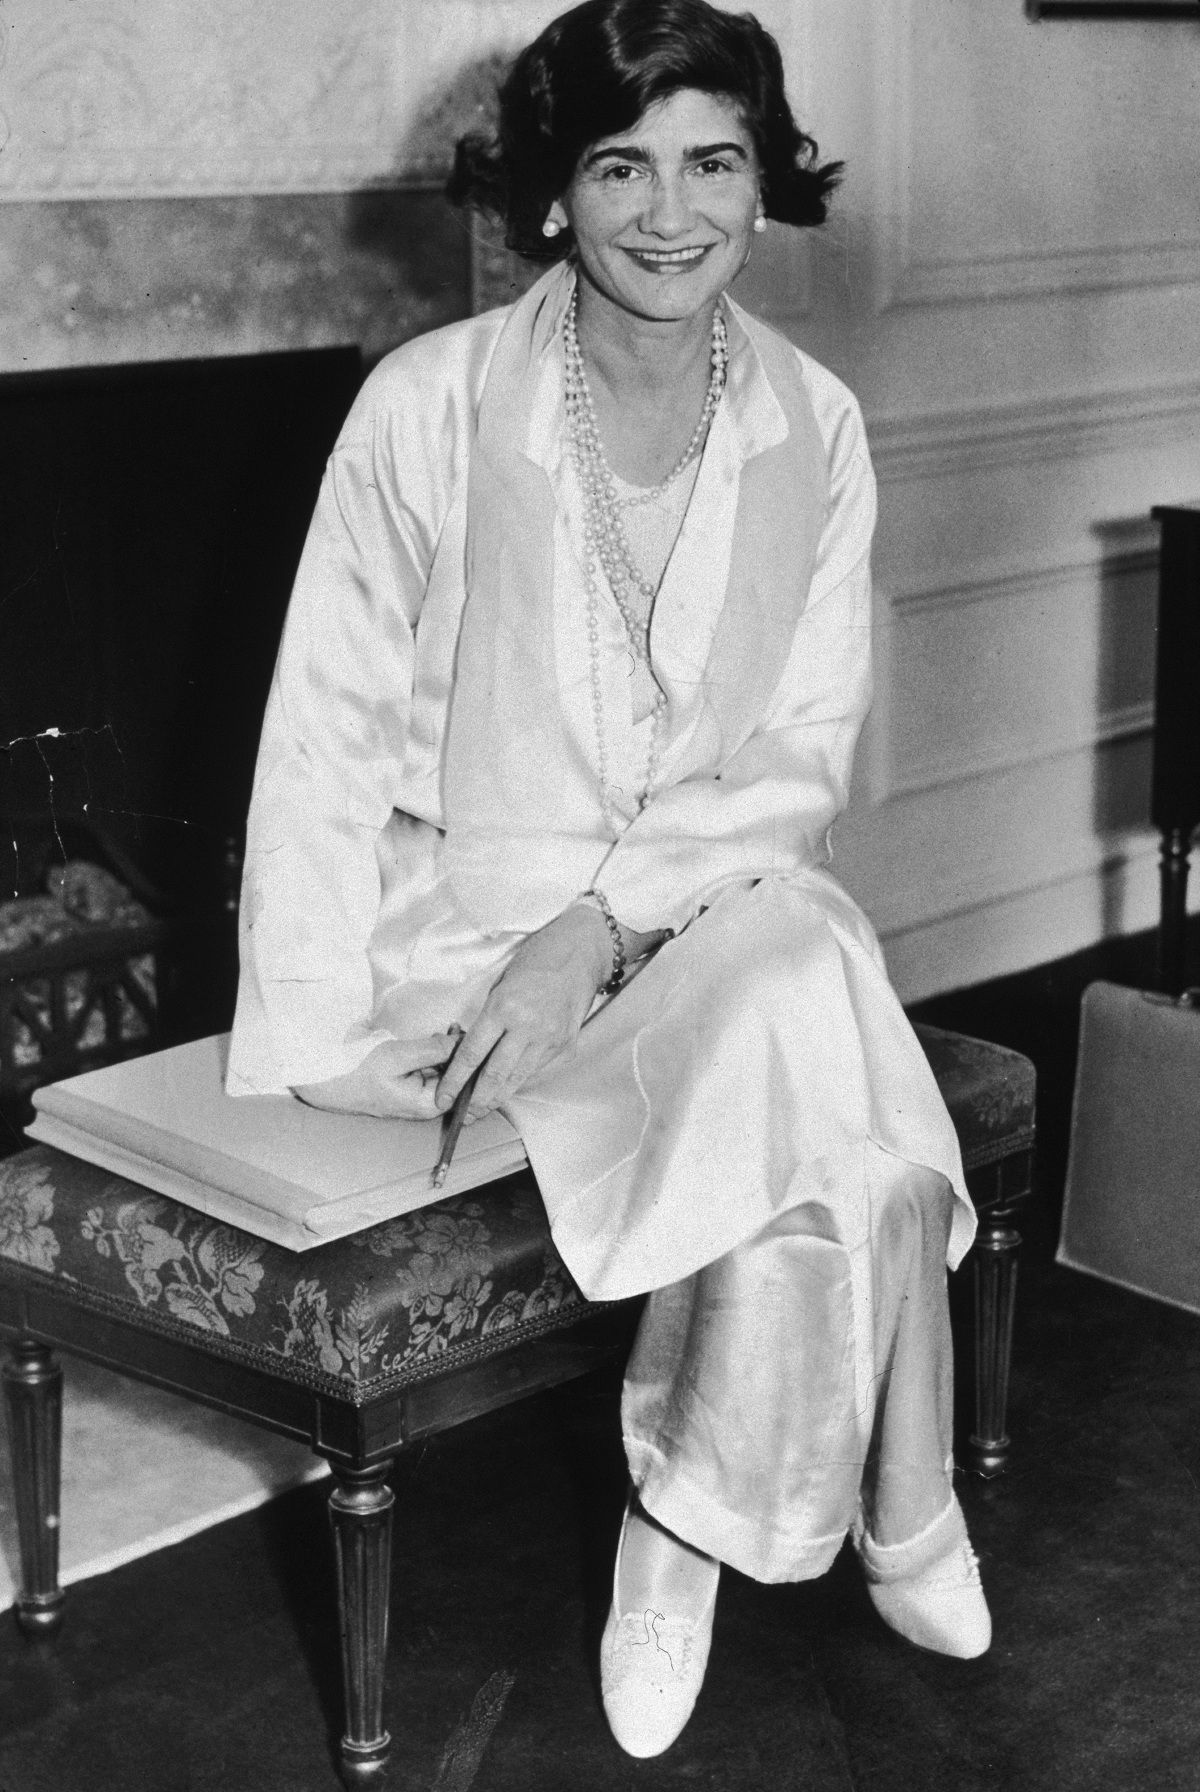 Style Icons: Why Coco Chanel Is The Undisputed Grande Dame Of Fashion -  Splendid Habitat